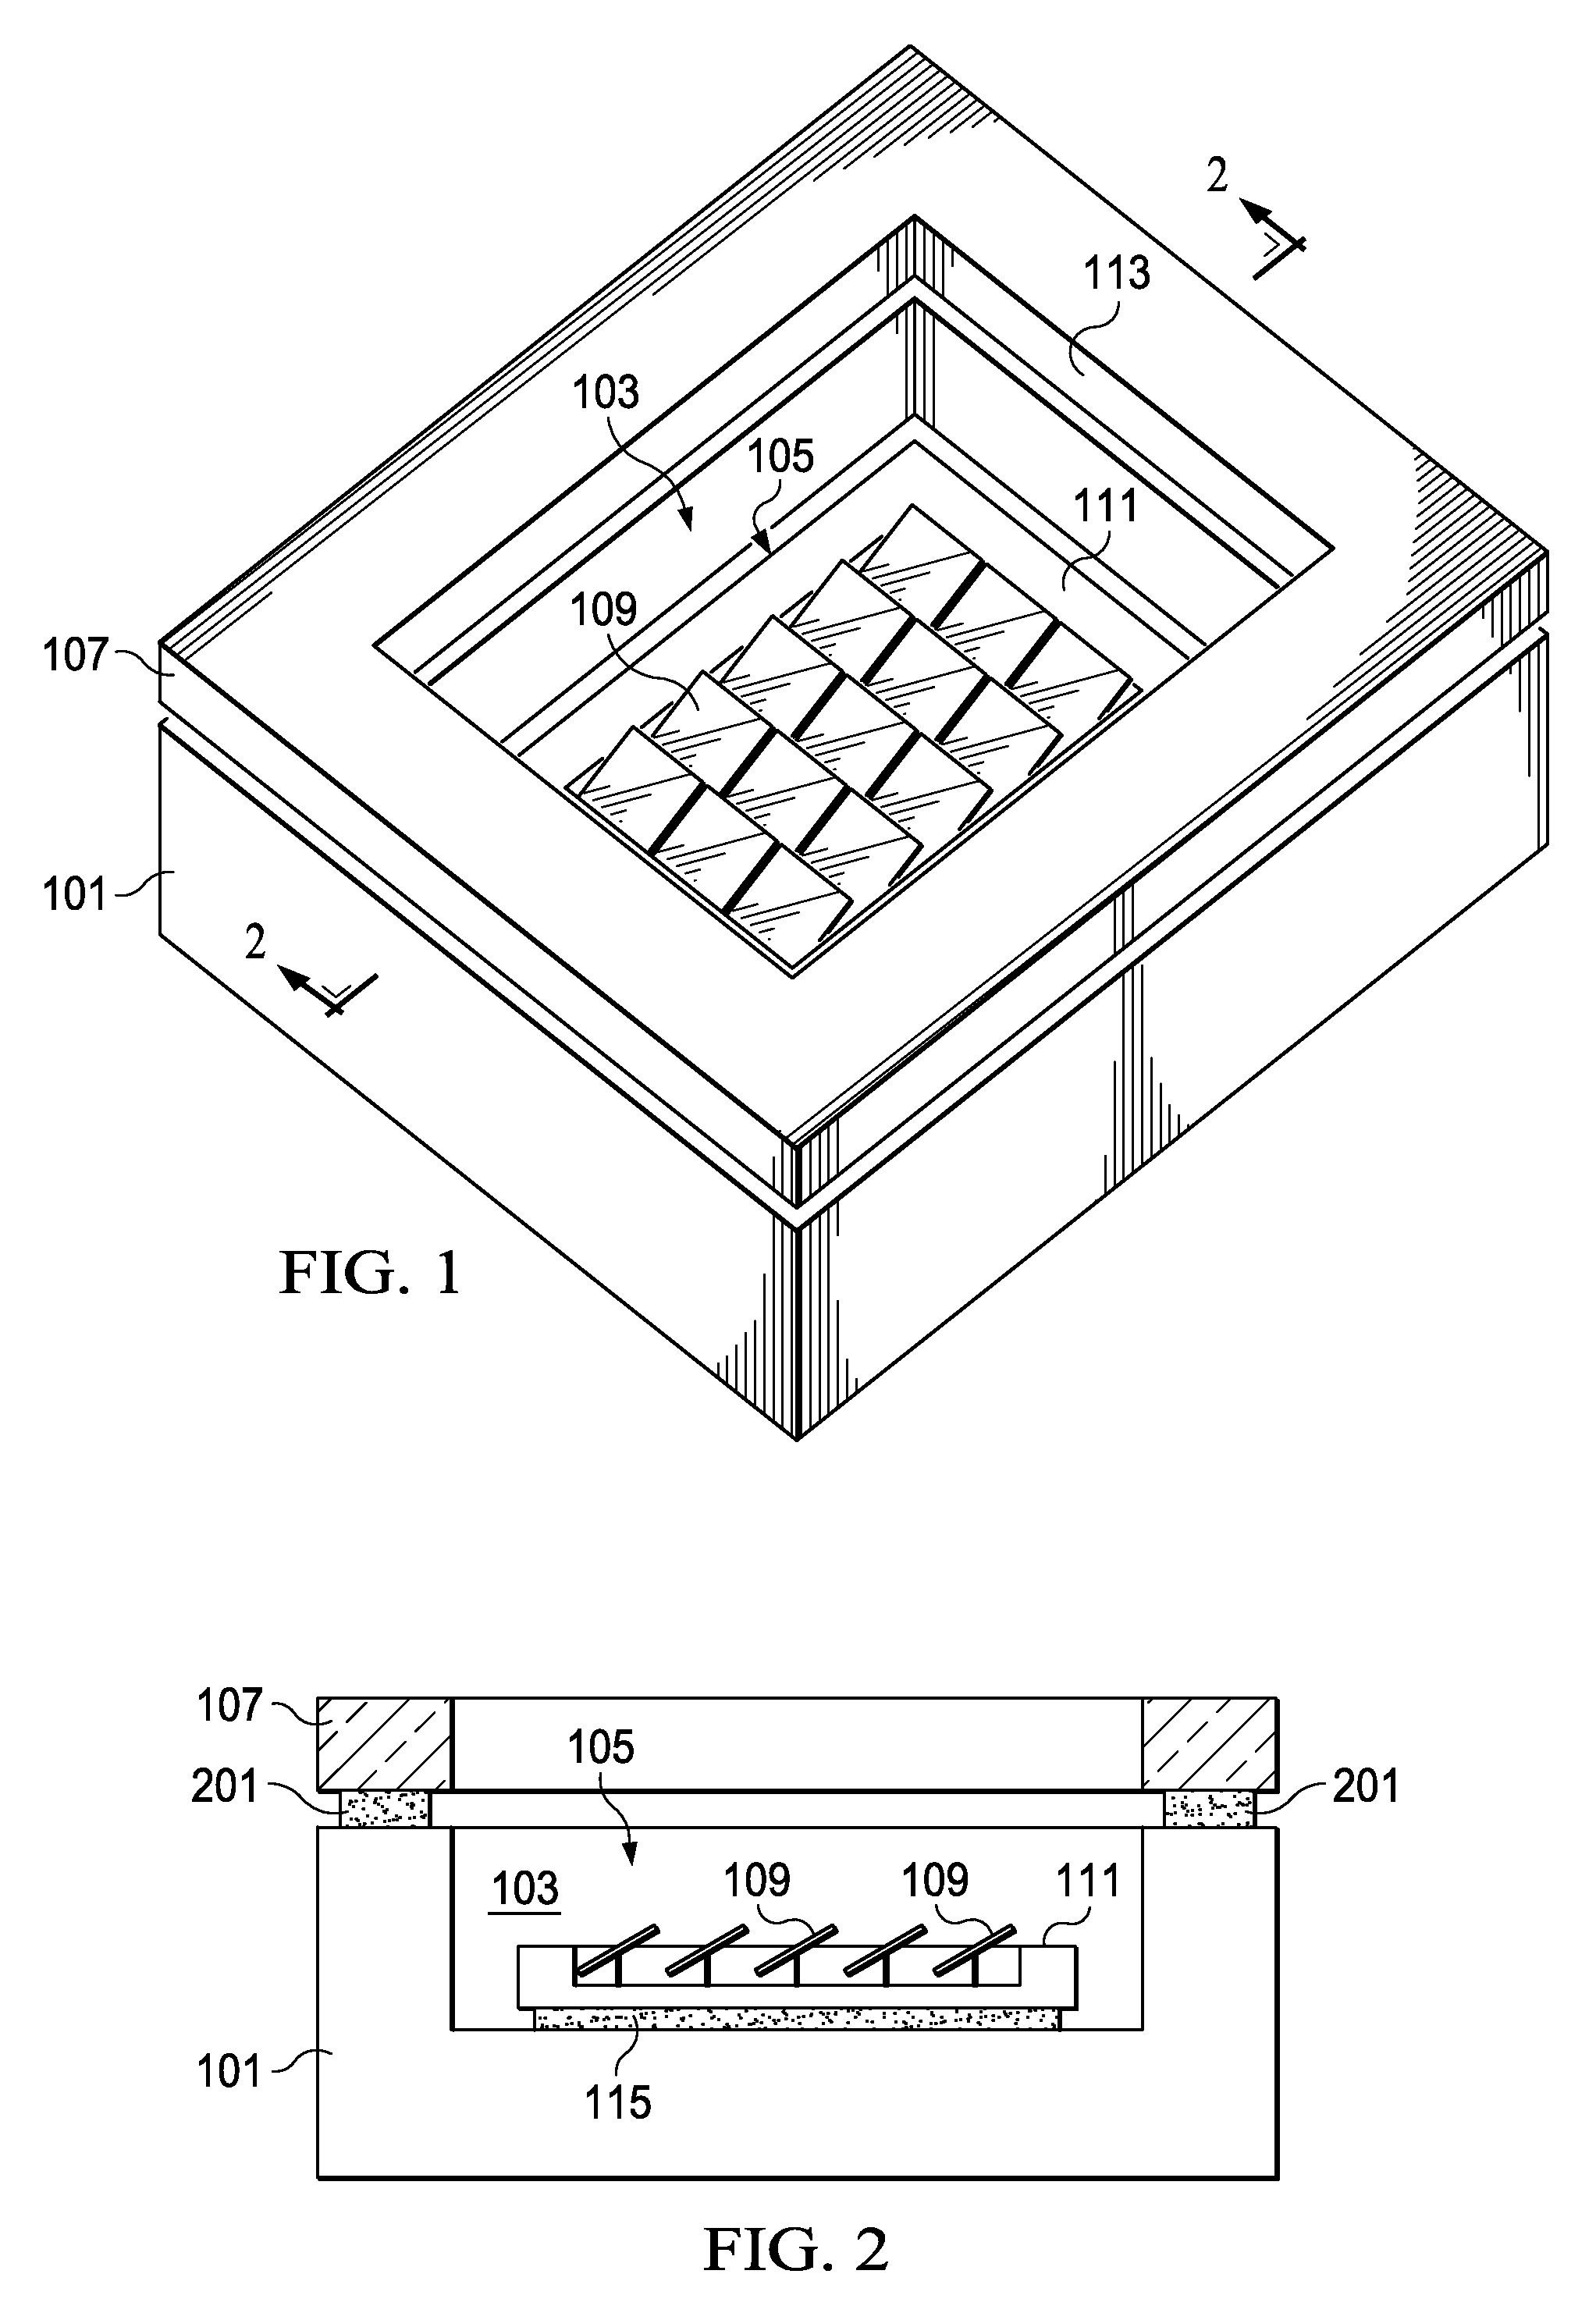 Microwave Cure of Semiconductor Devices